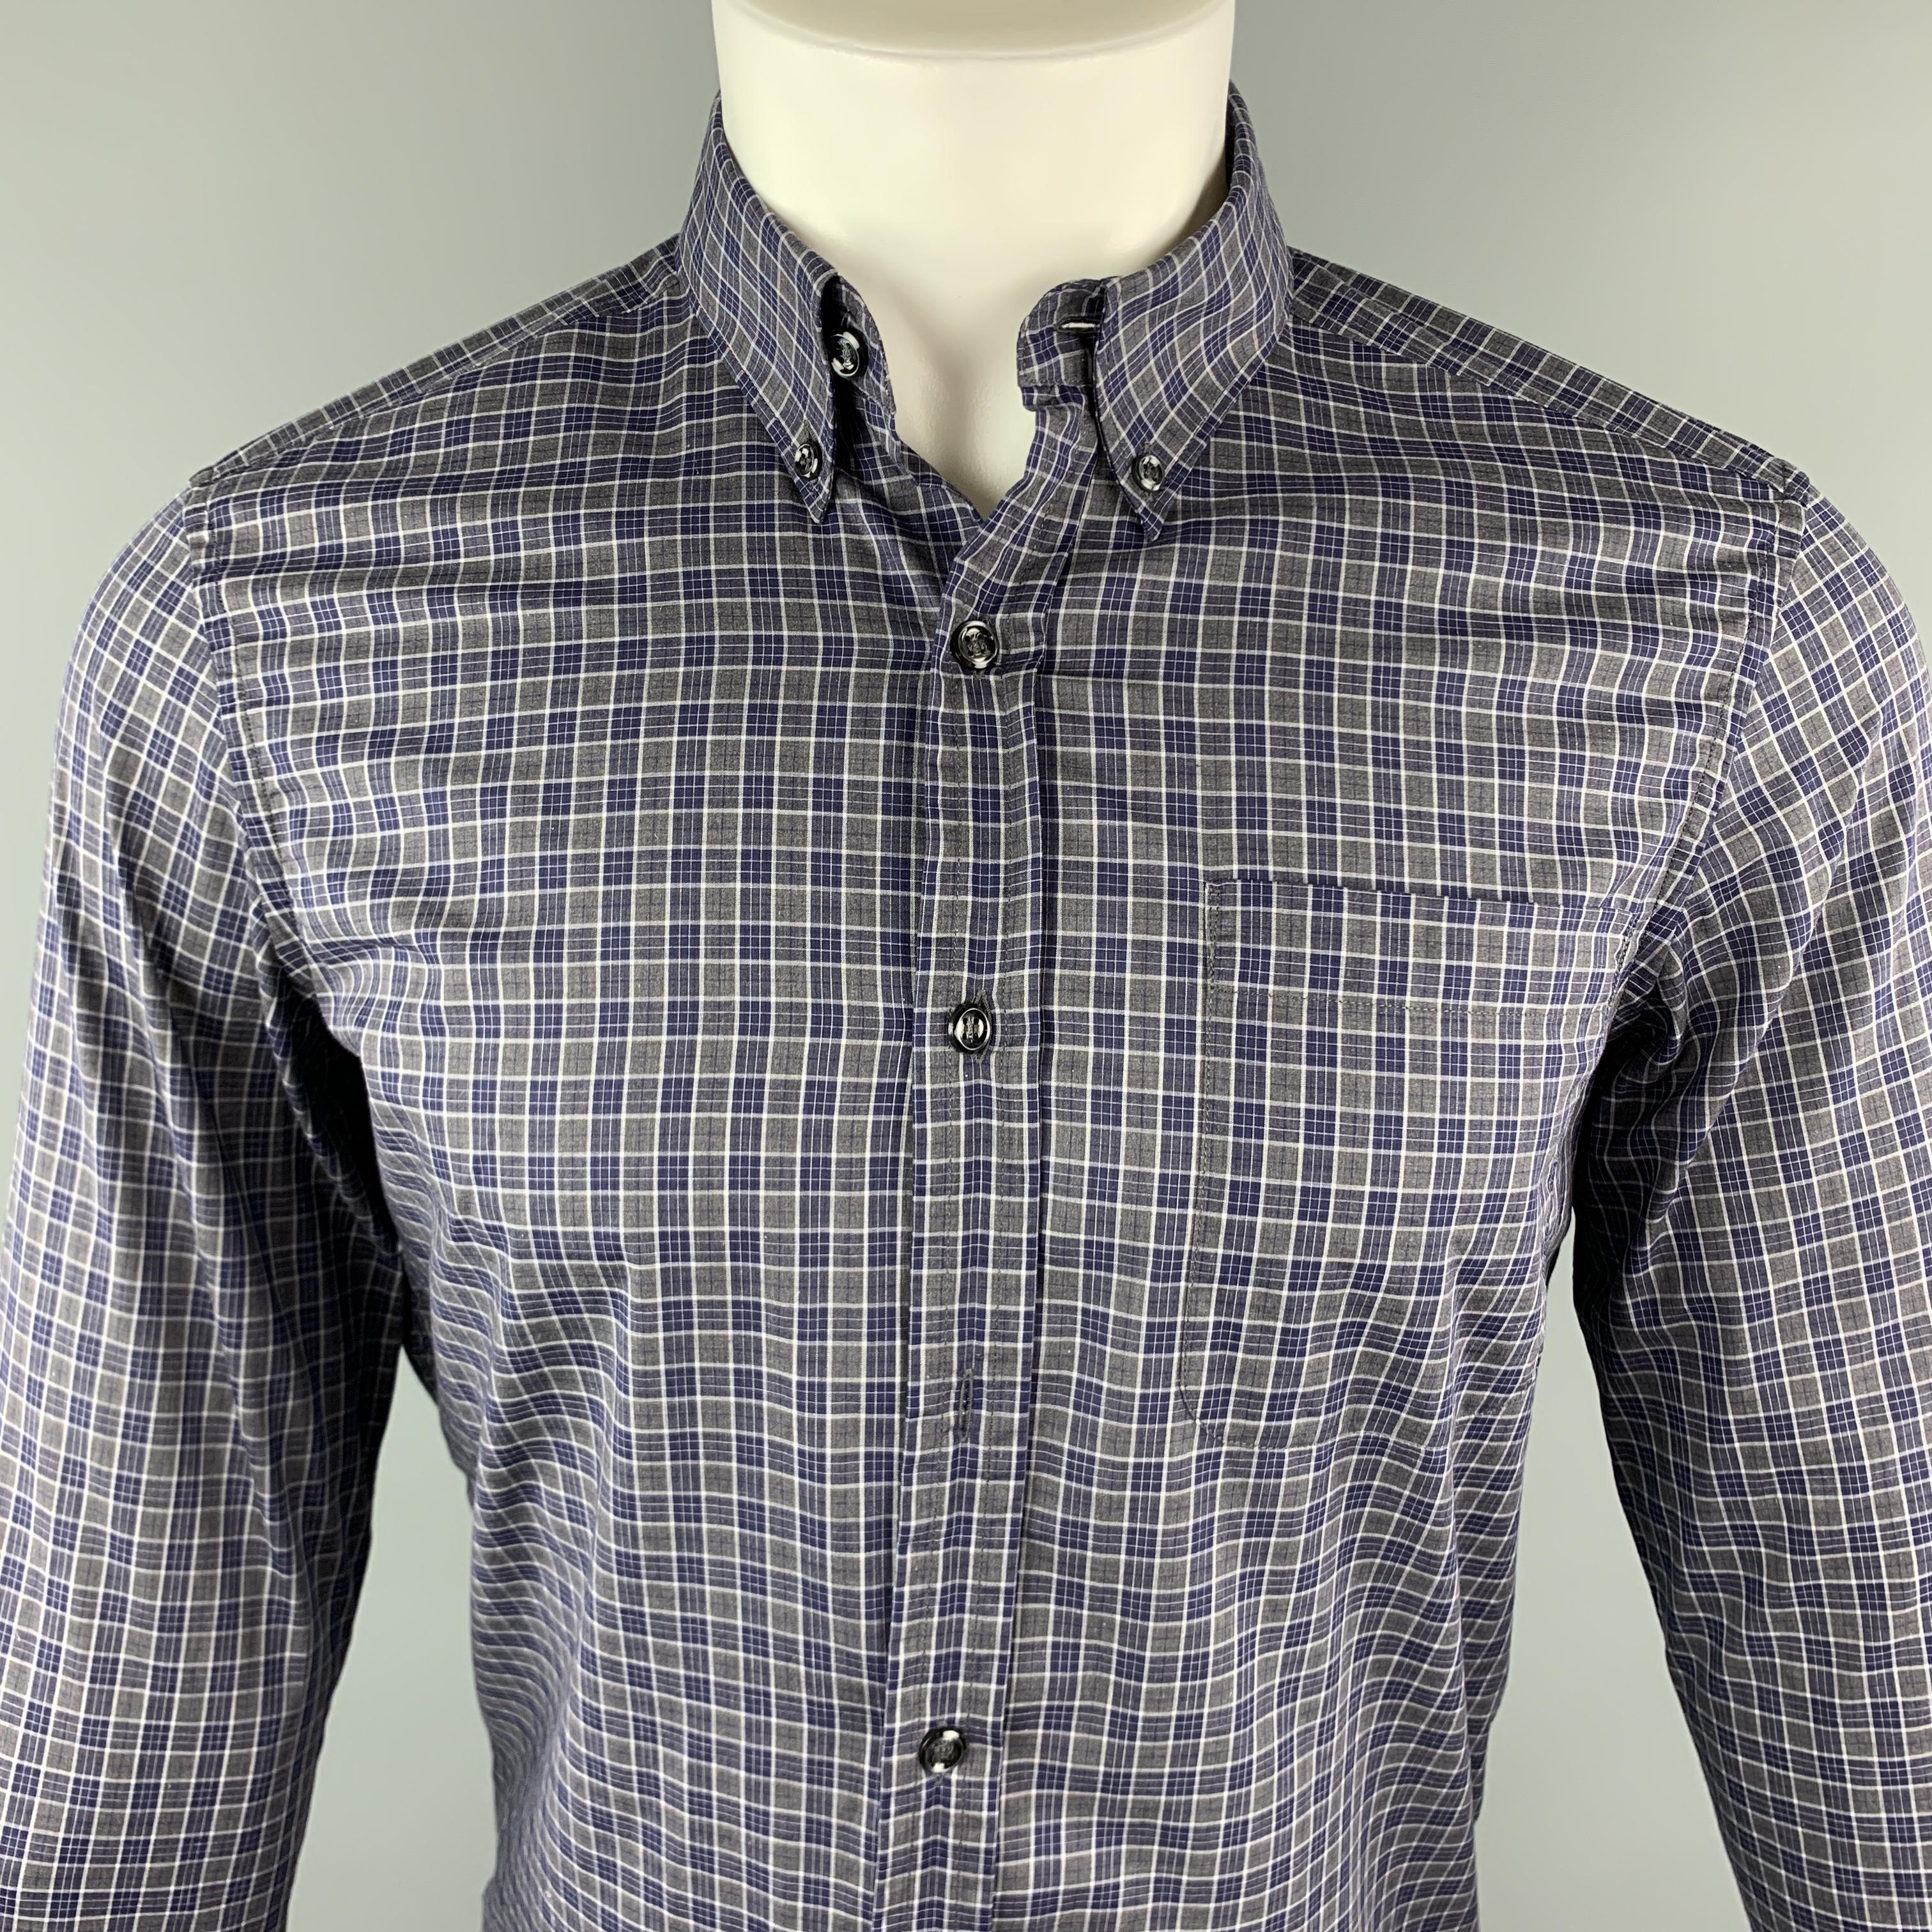 YVES SAINT LAURENT Long Sleeve Shirt comes in gray & navy plaid cotton featuring a button down style, spread collar, a front patch pocket and buttoned cuffs. Missing one button. Made in Italy.

Very Good Pre-Owned Condition.
Marked: 38 /